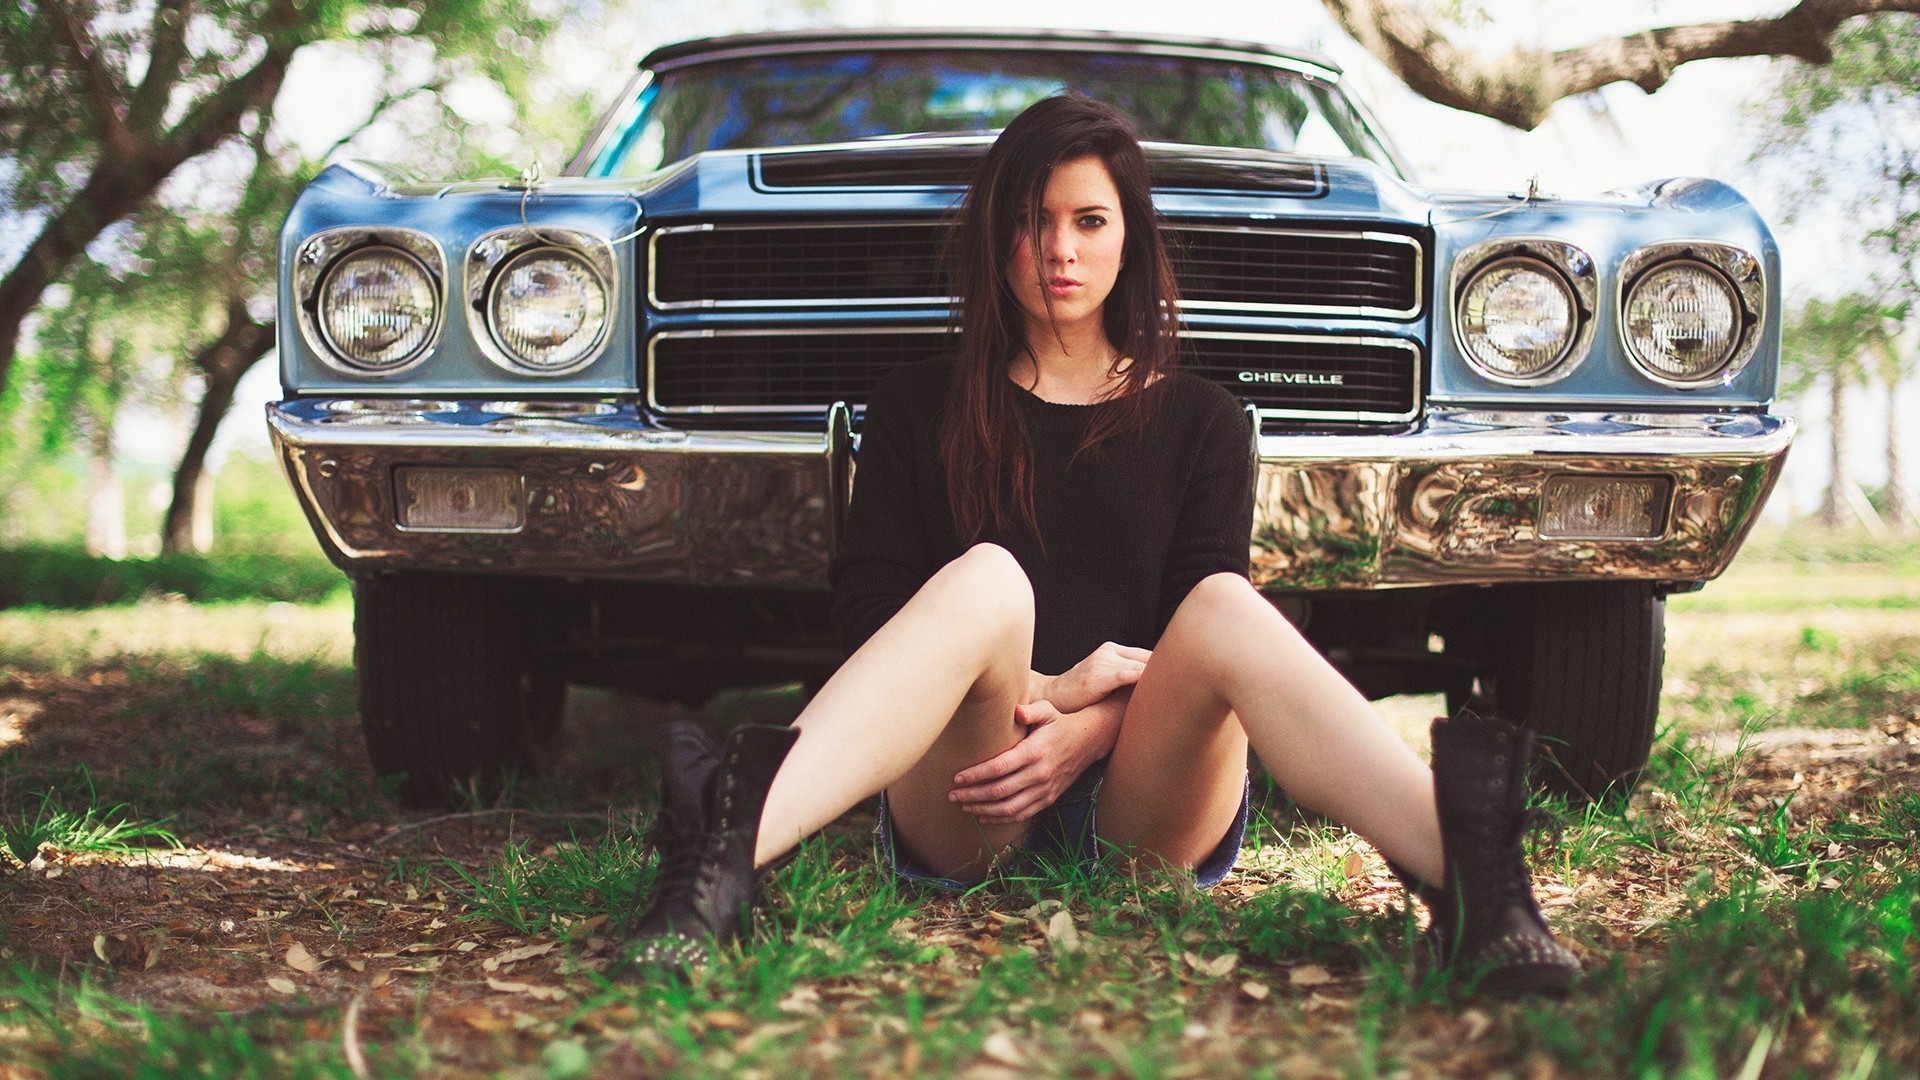 People 1920x1080 car women Chevrolet Chevelle brunette jean shorts nature grass women with cars Chevelle SS boots vehicle sitting women outdoors blue cars dark hair looking at viewer legs Chevrolet no socks